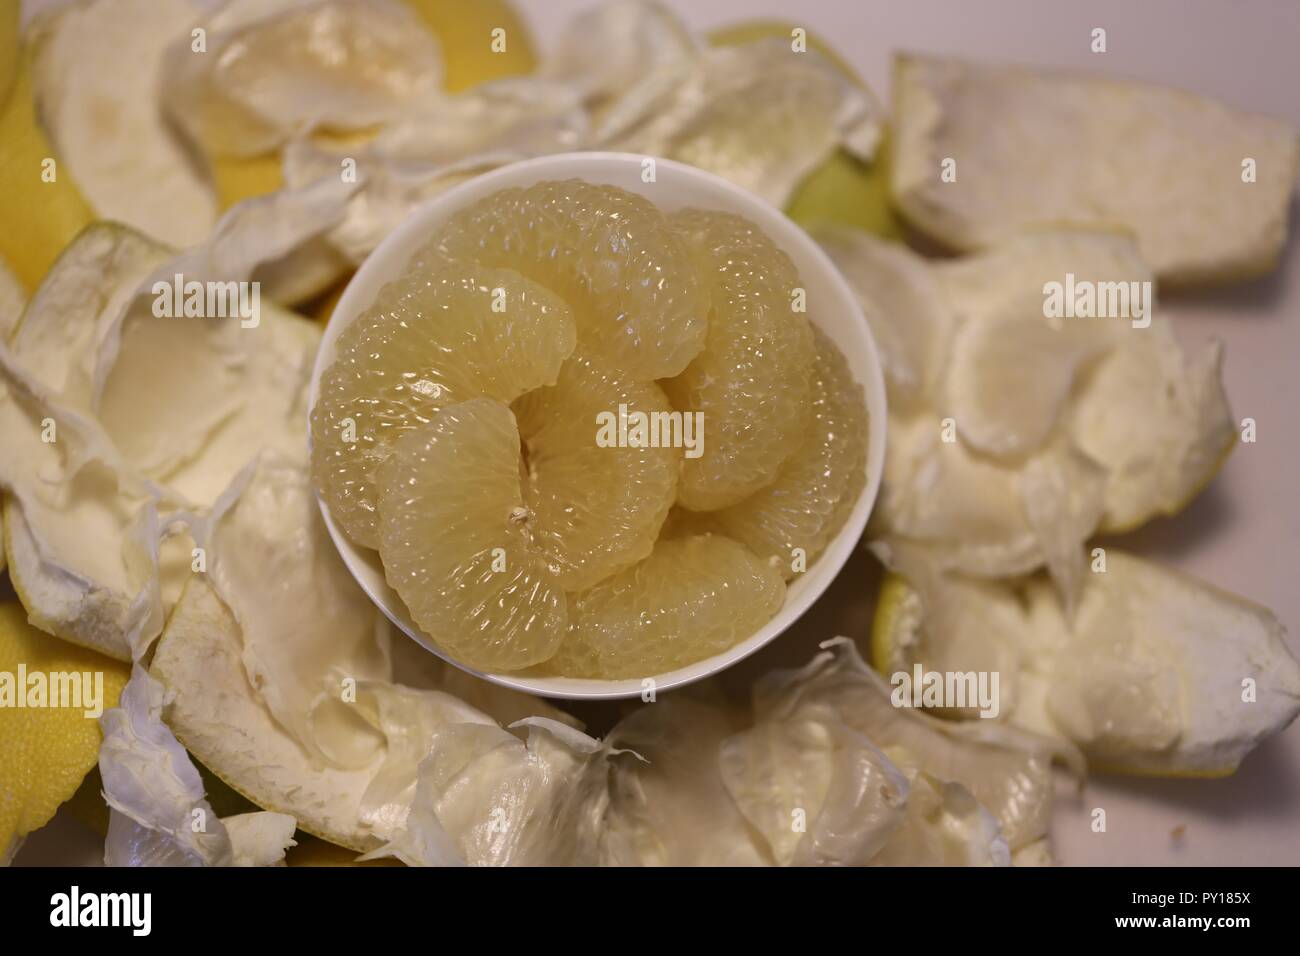 Sweetie. Peeled sweetie slices in a white dish. White bowl full of sliced Sweetie. Hybridization of grapefruit and pomelo. Fresh peeled sweetie. Stock Photo